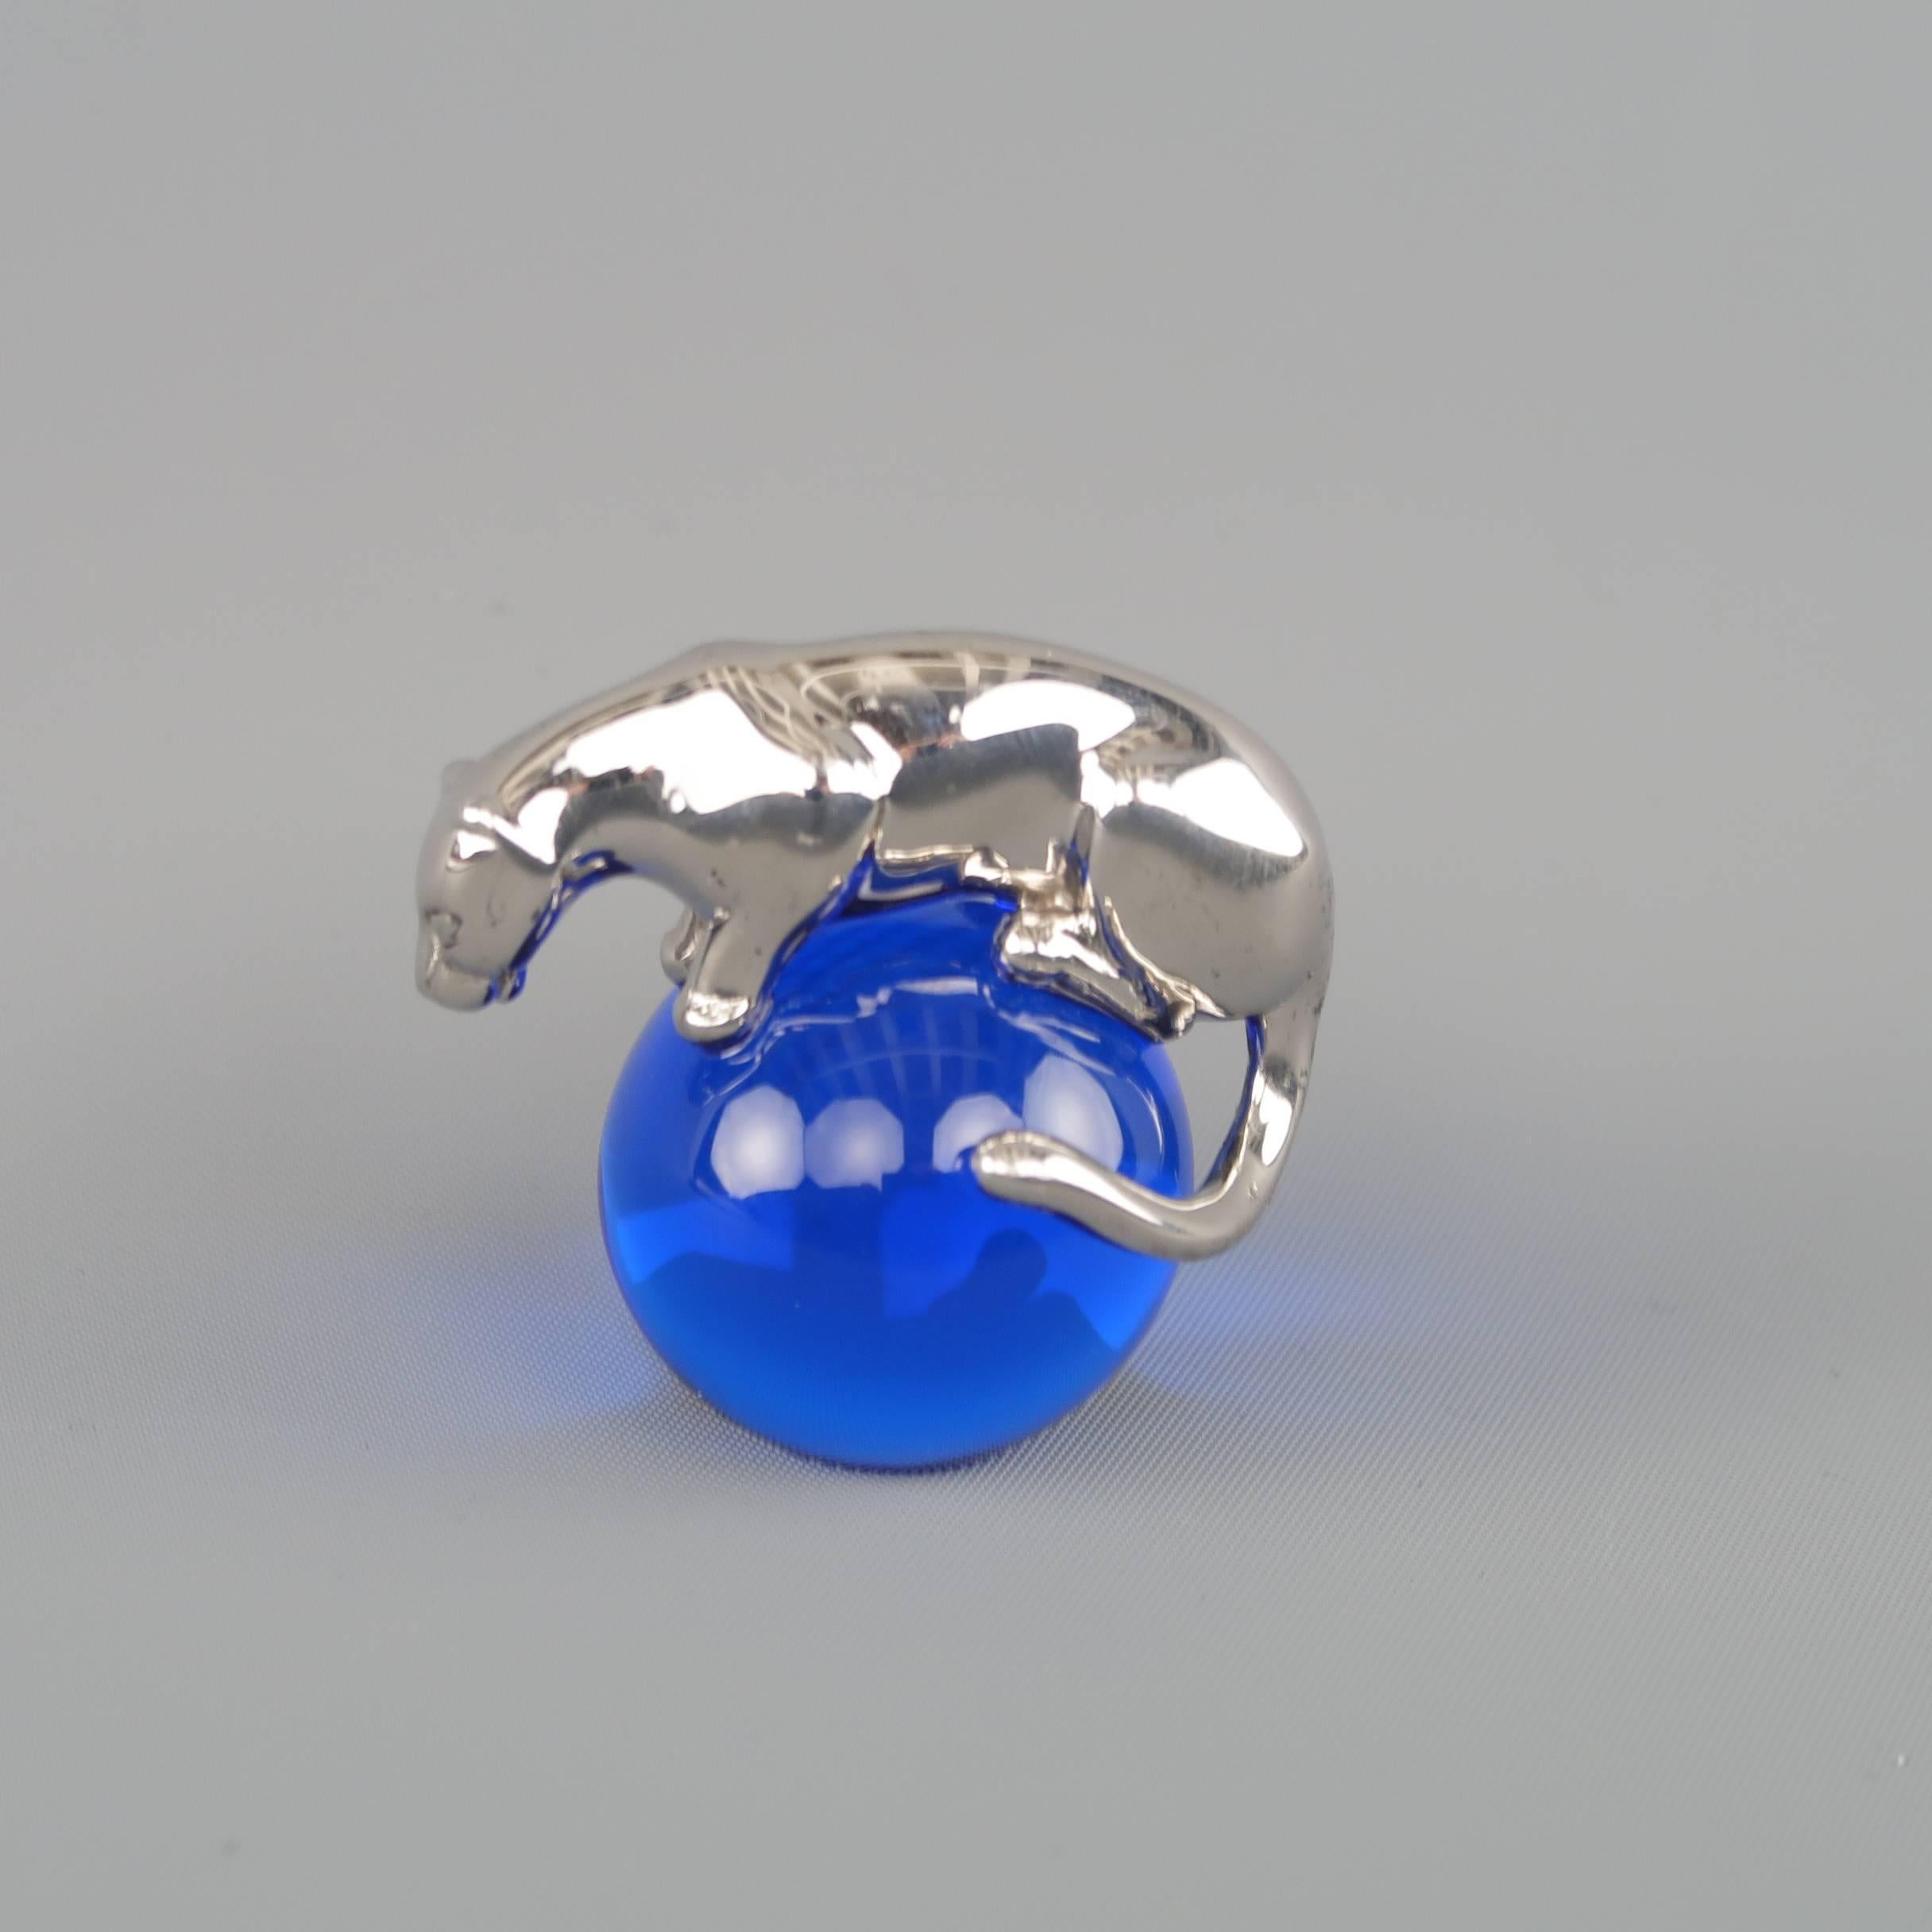 CARTIER mini paperweight features a polished sterling panther with royal blue glass crystal ball. Includes original box. Made in Spain.
 
Good Pre-Owned Condition.
Marked: 925 SPAIN
 
Height: 1.75 in.
Width: 2 in.

SKU: 85630